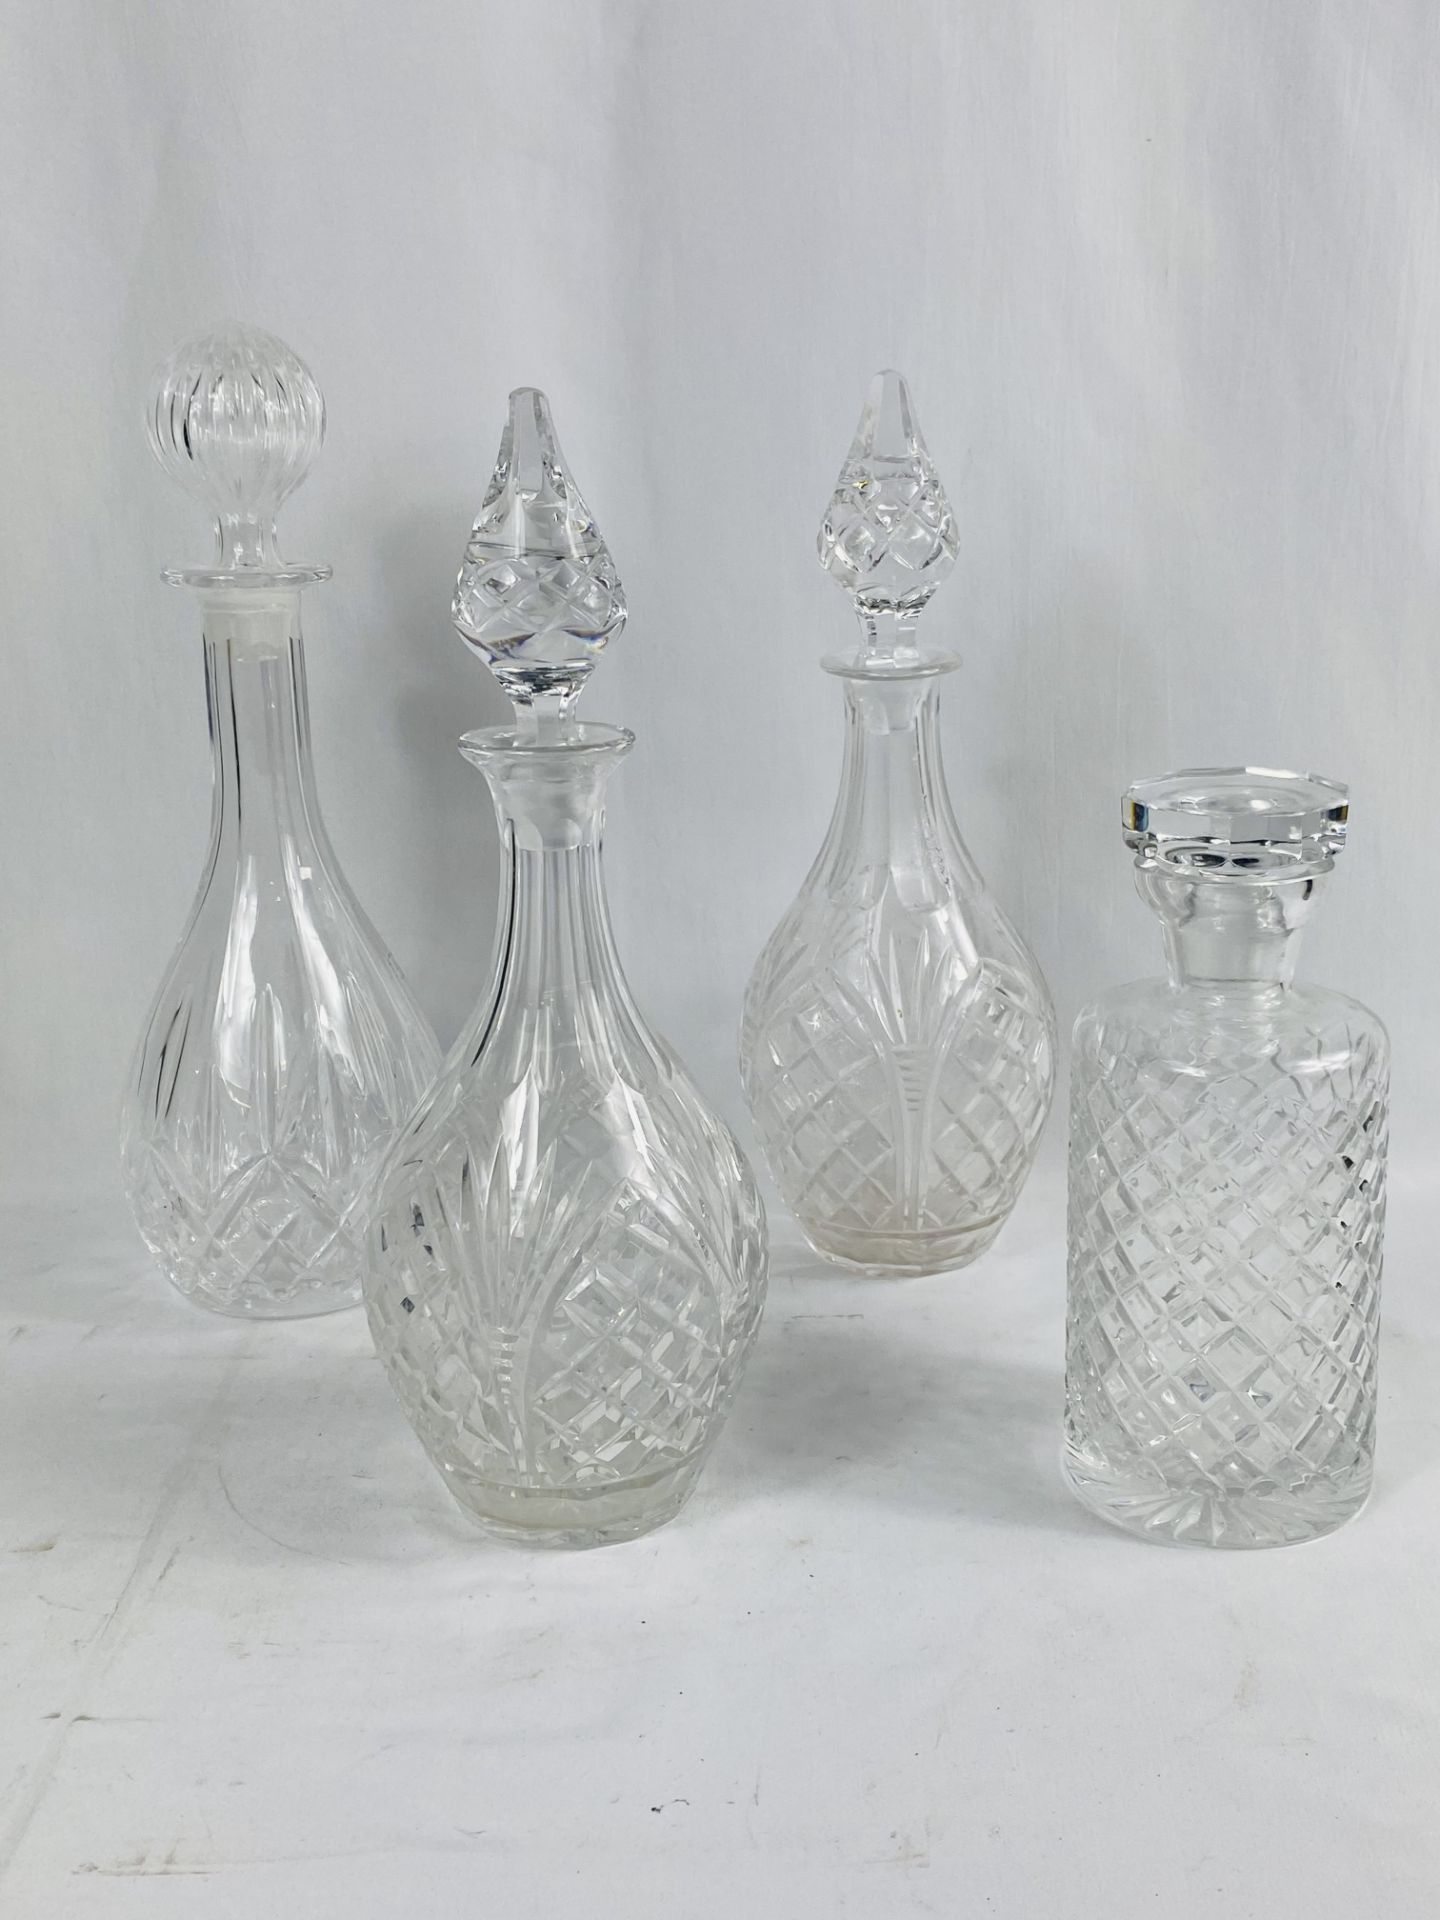 Four cut glass decanters